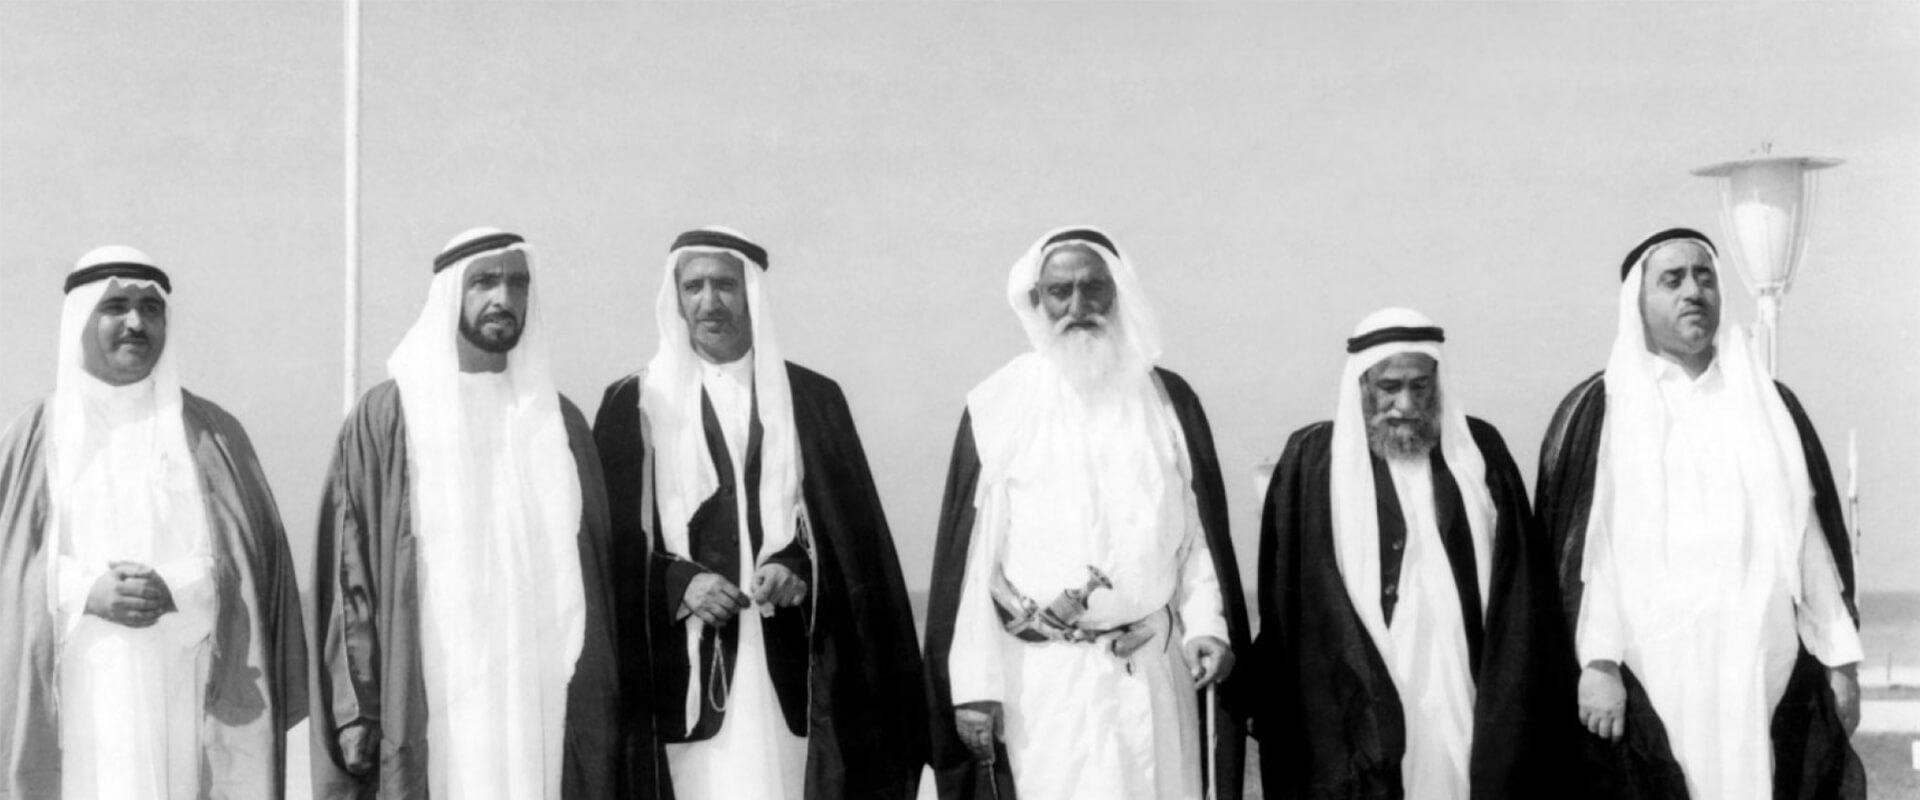  Sheikhs of 6 Emirates standing infront of the UAE flag on the 2nd of December 1971, in black and white.